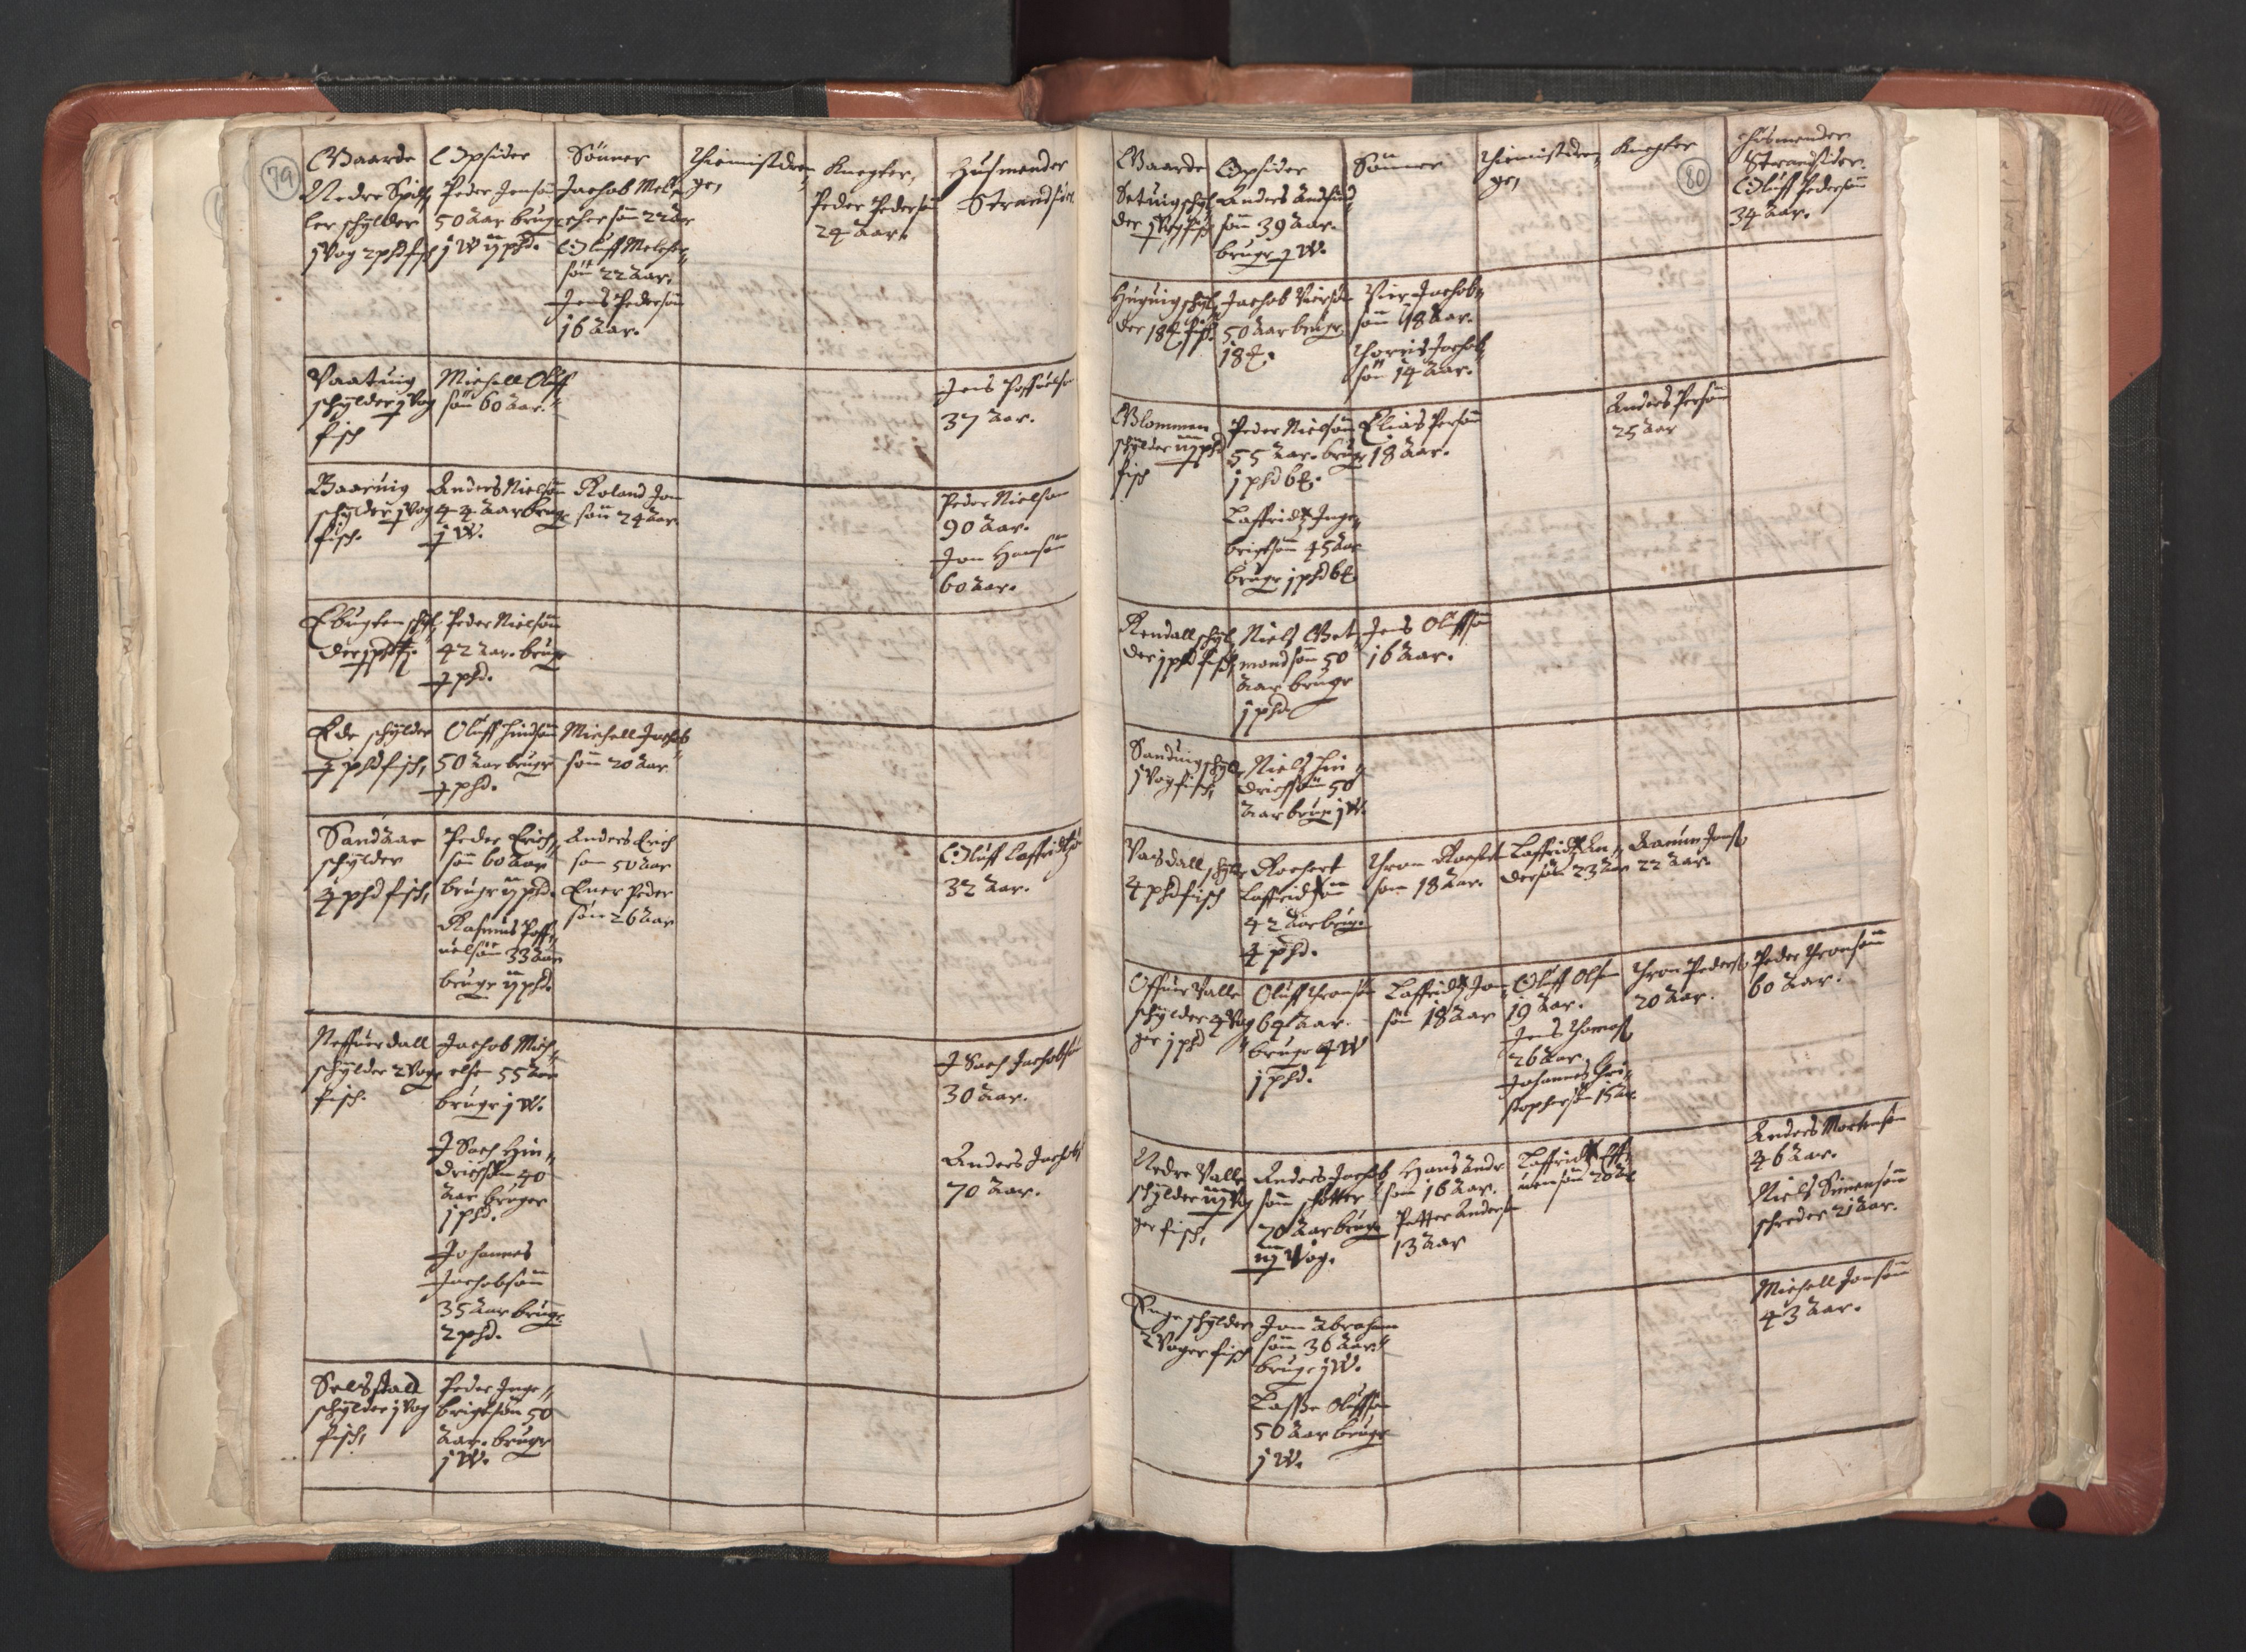 RA, Vicar's Census 1664-1666, no. 35: Helgeland deanery and Salten deanery, 1664-1666, p. 79-80